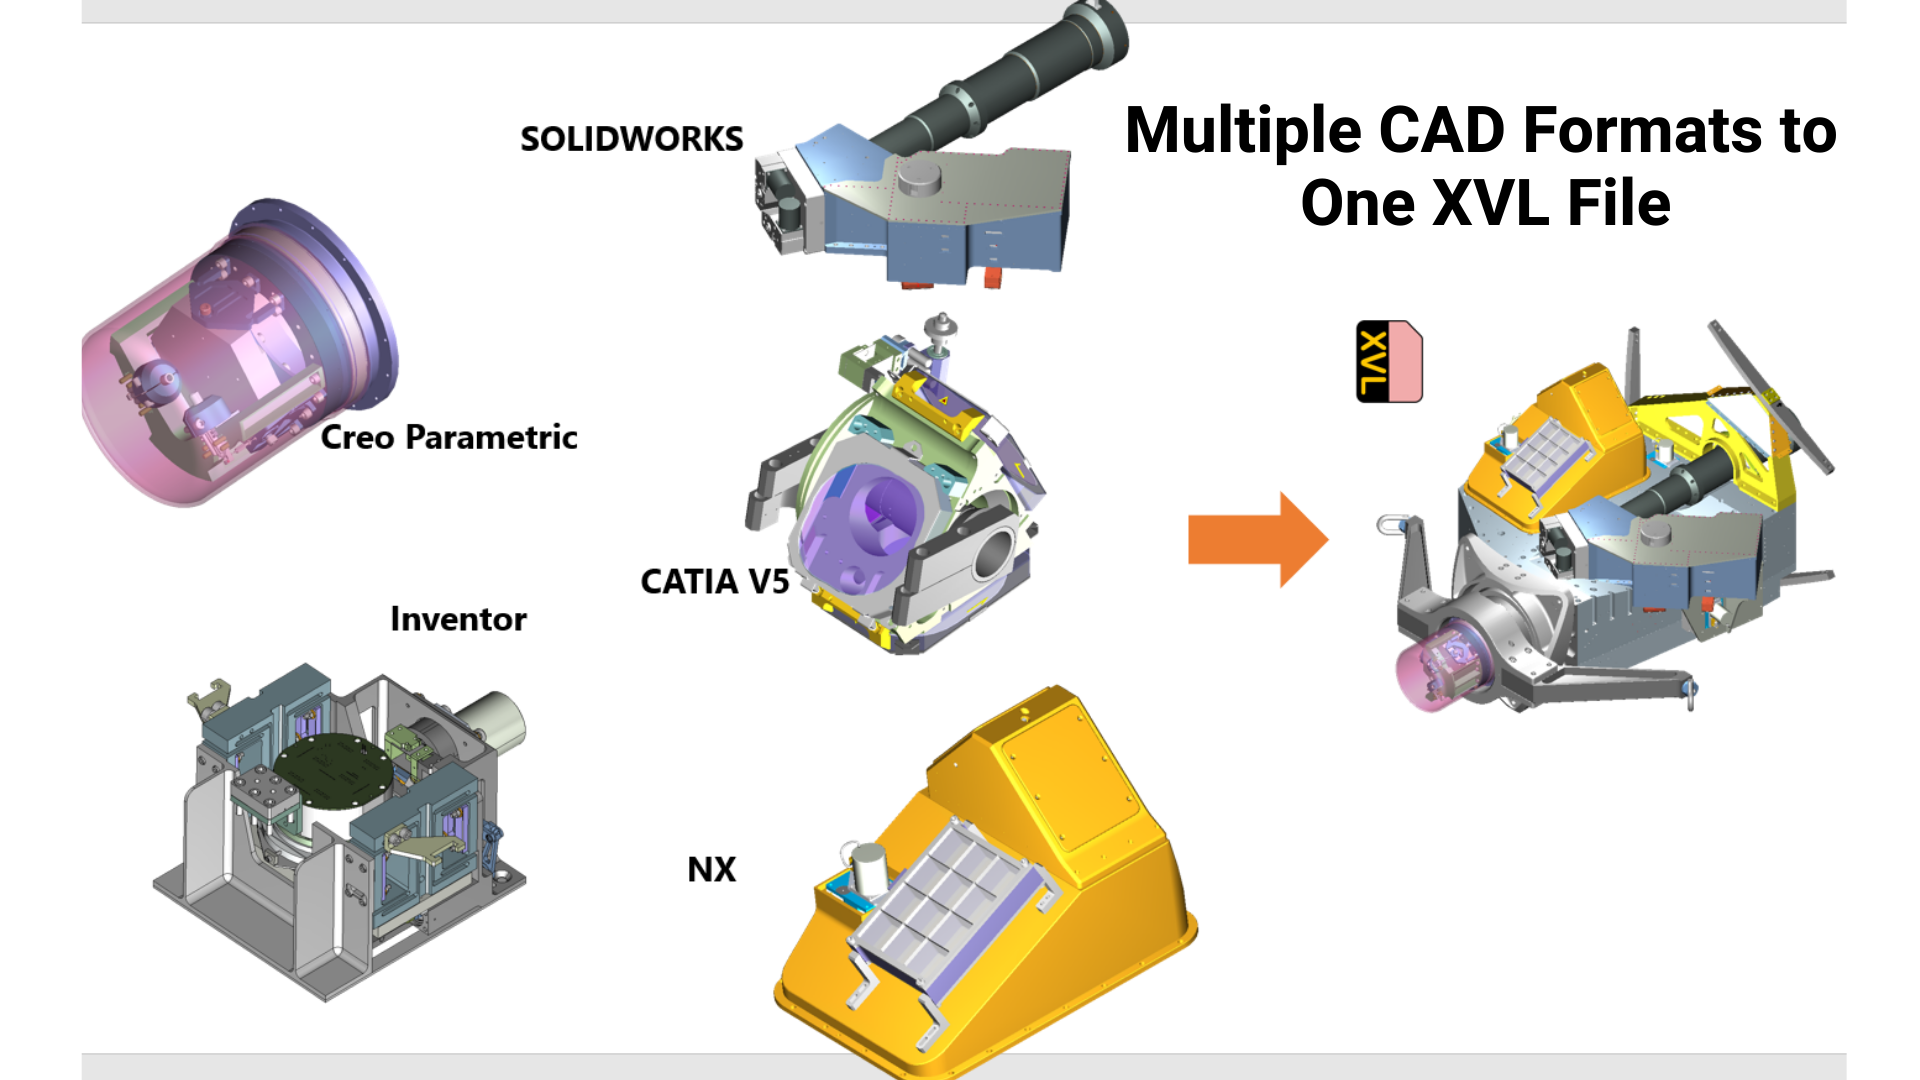 Convert multiple CAD formats to one XVL file